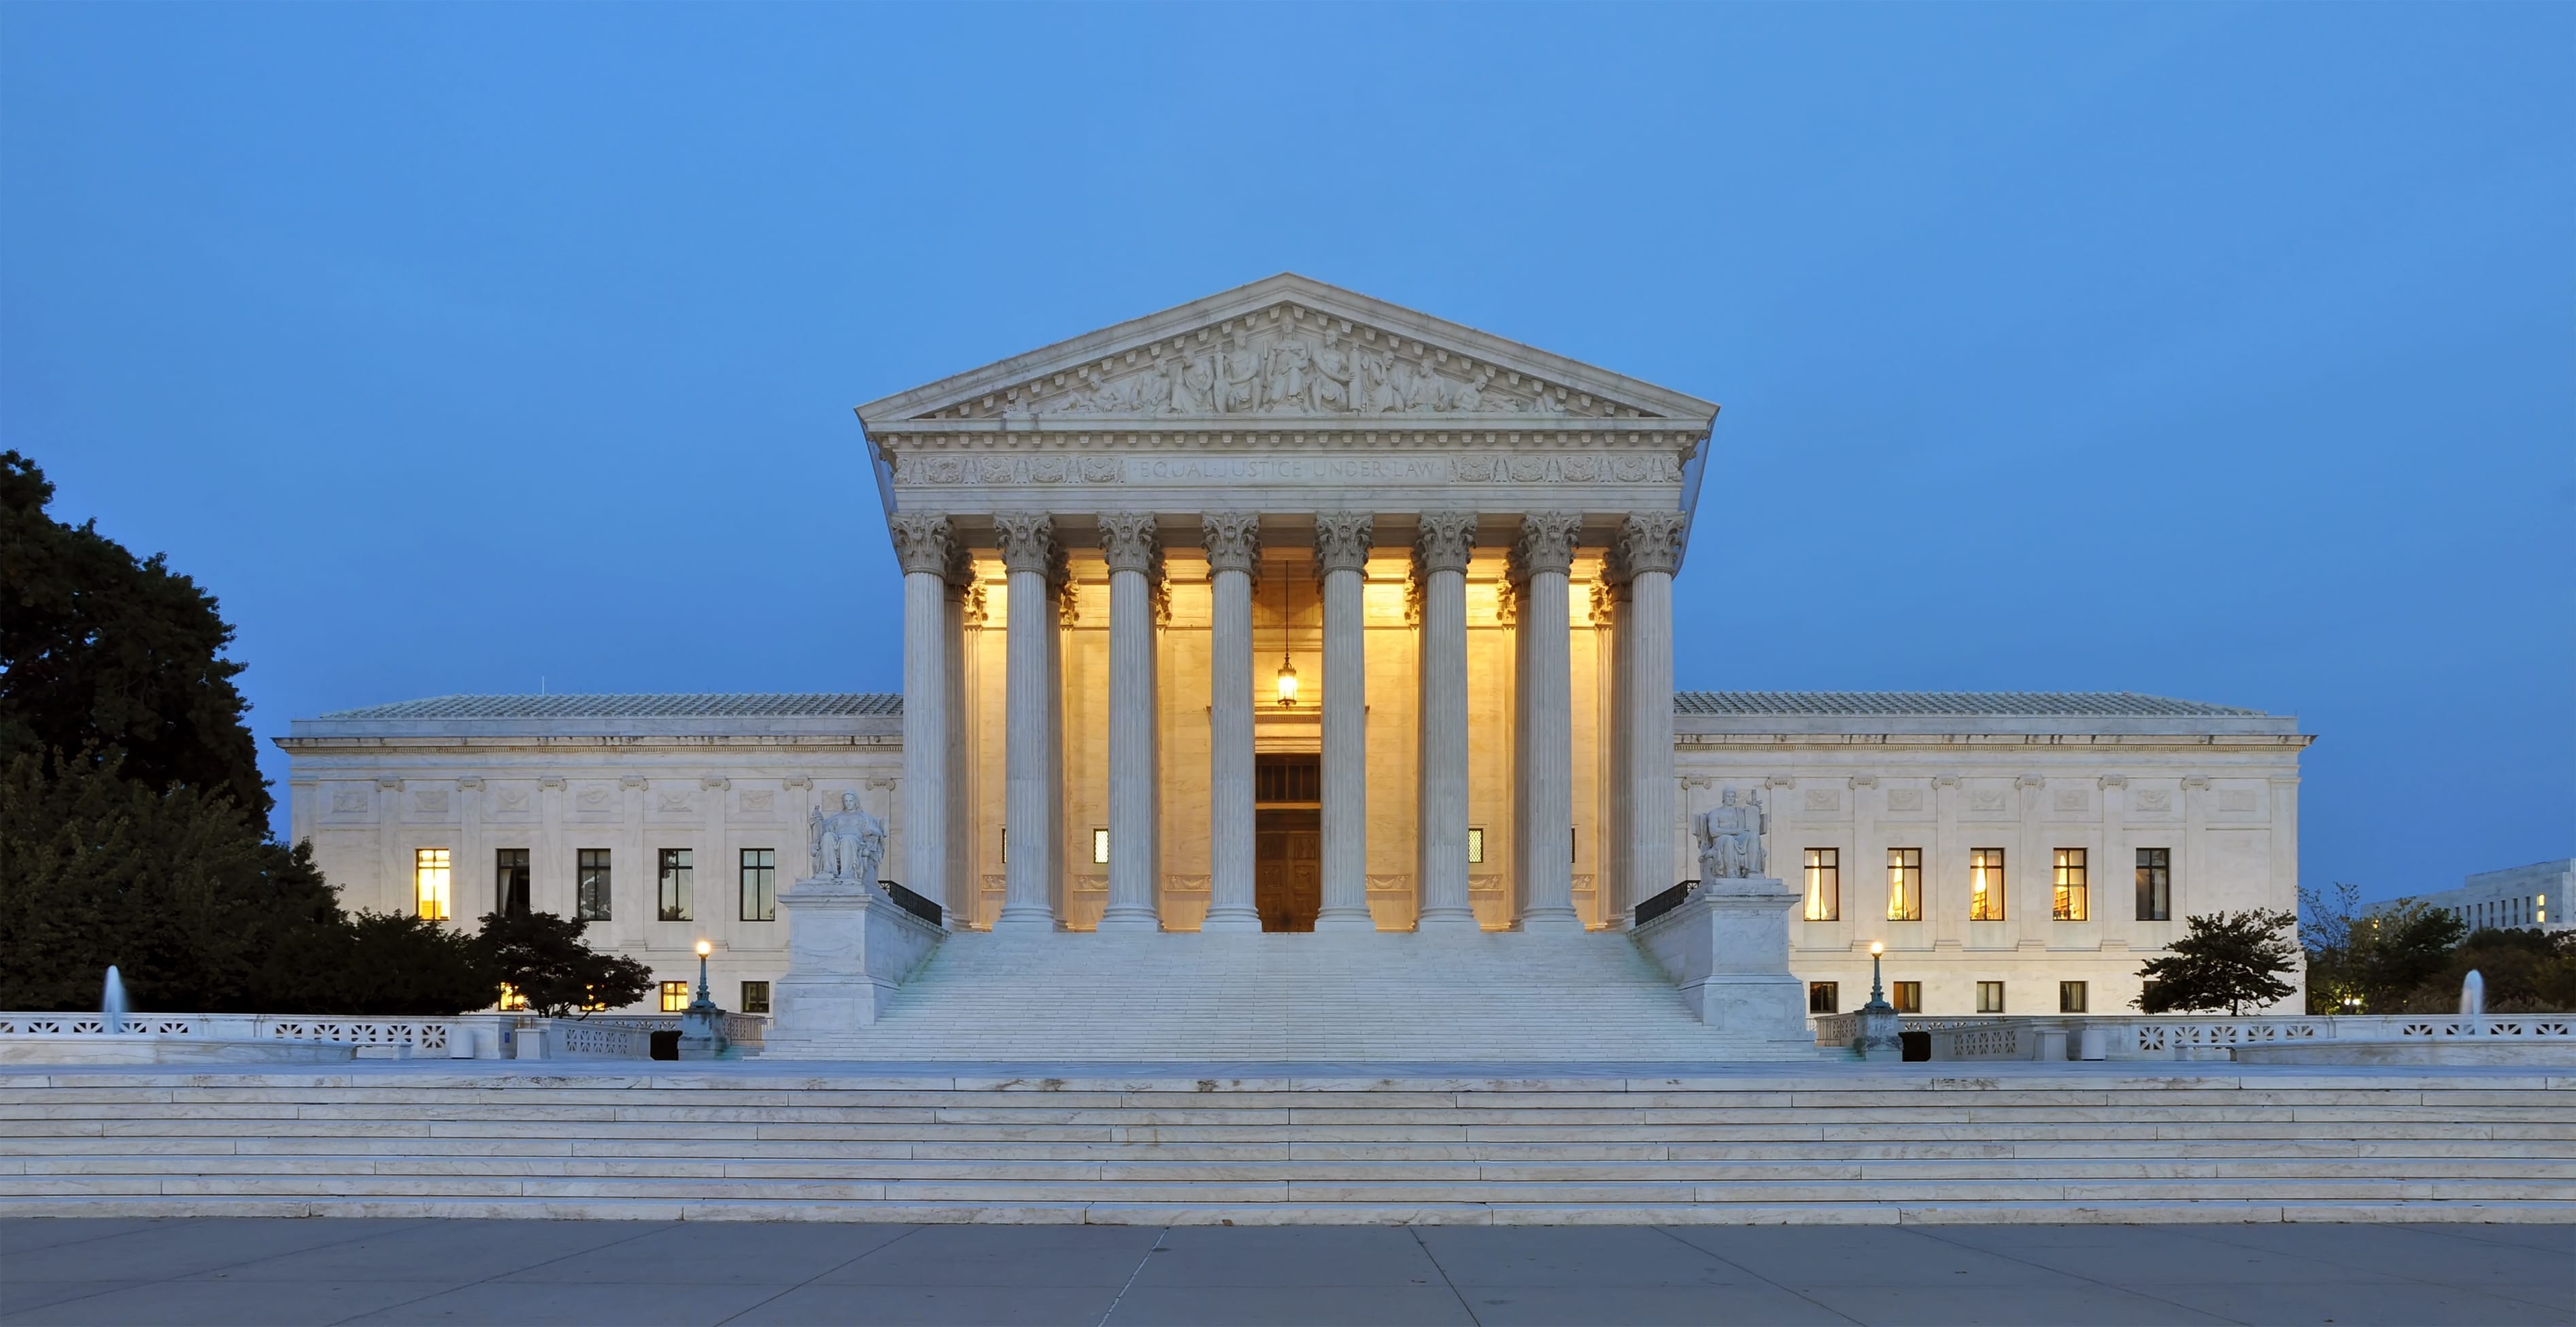 The Supreme Court building; image courtesy of www.commons.wikimedia.org, Joe Ravi, under license CC-BY-SA 3.0.